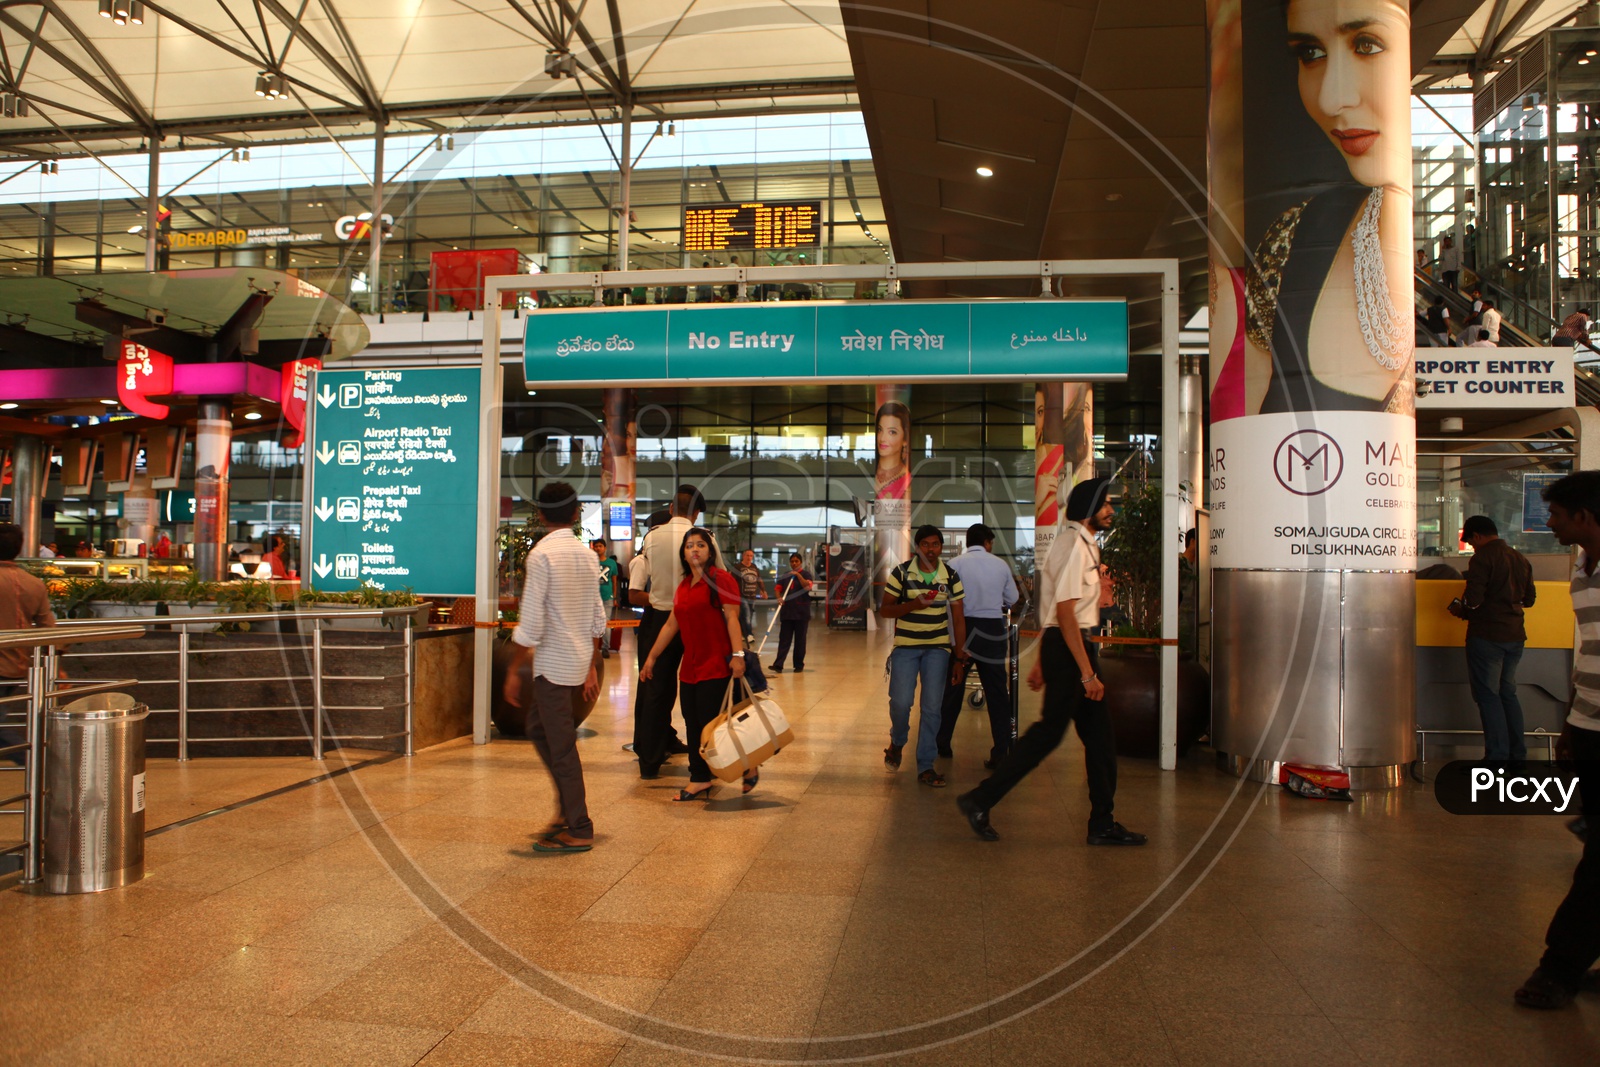 No Entry Boards In Airport